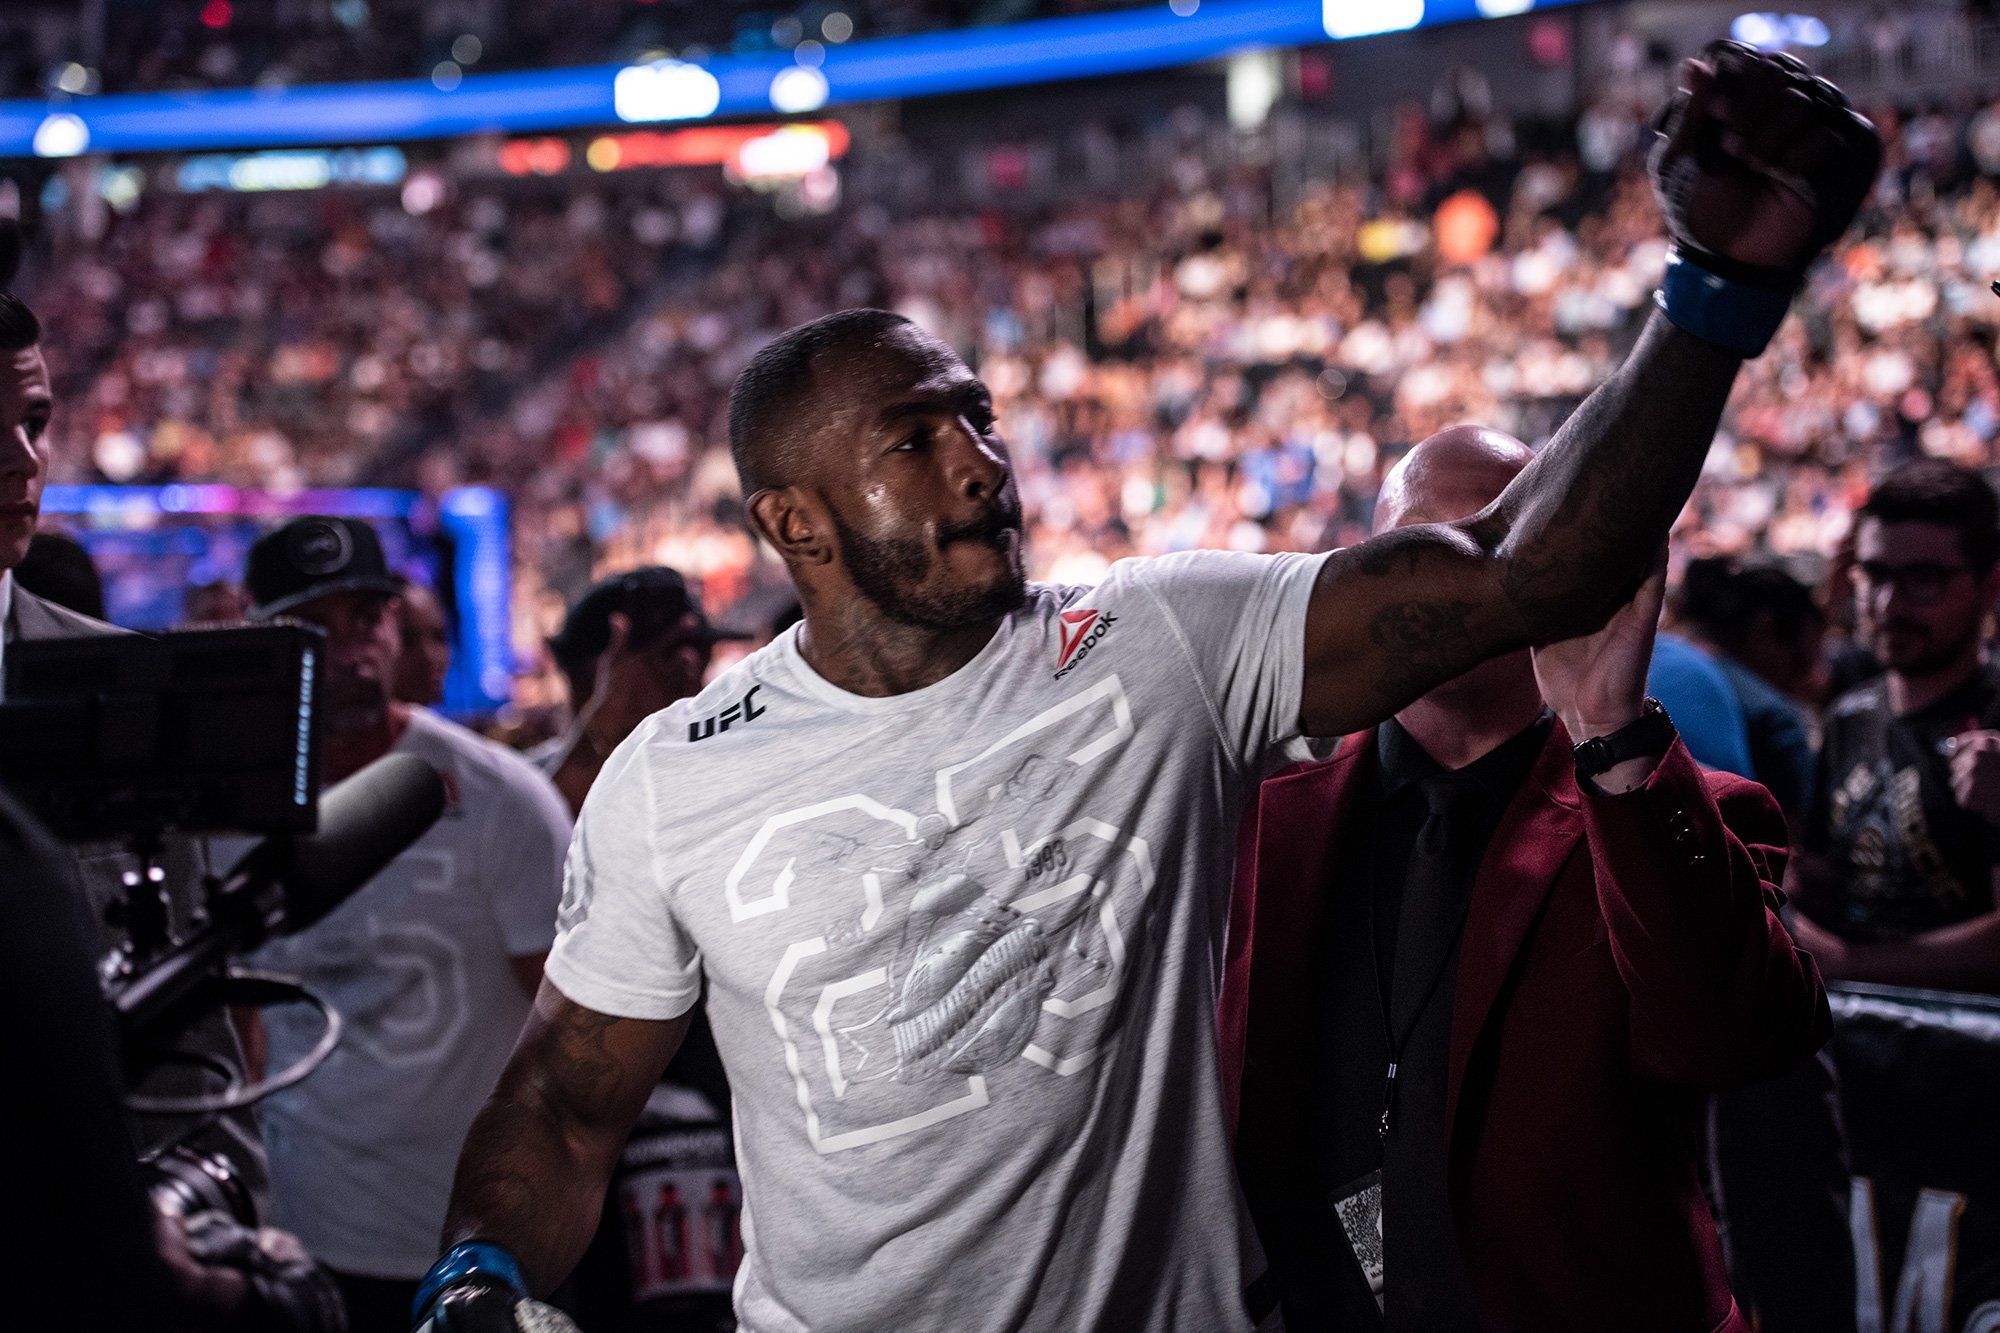 UFC 226 Miocic vs. Cormier - Live Results & Play By Play Updates -